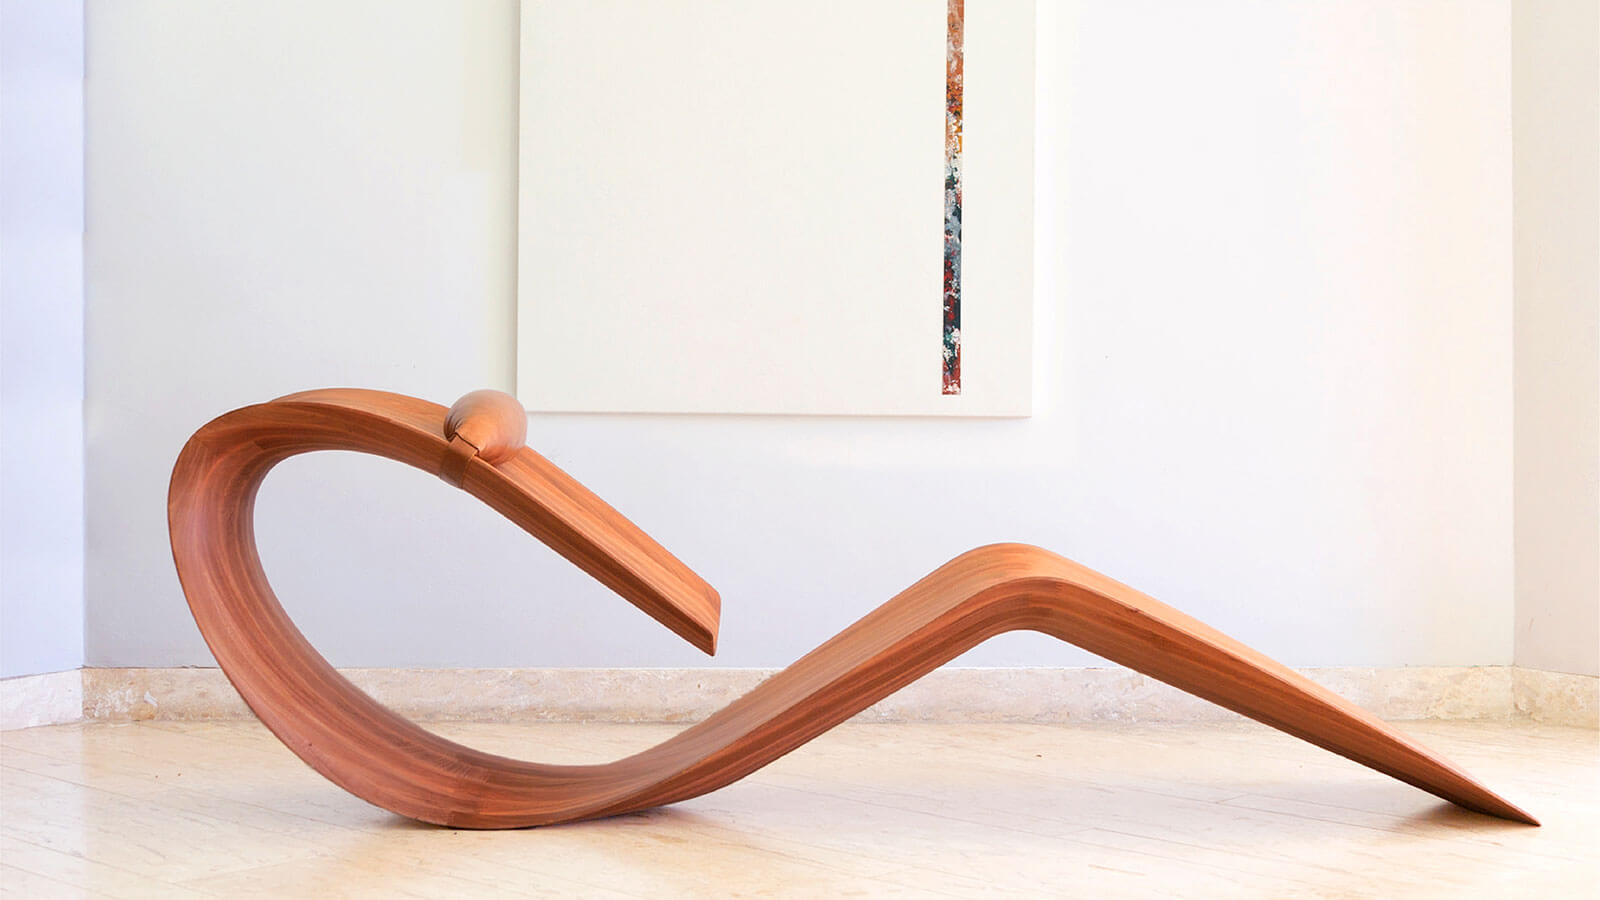 Chaise Longue', 2019 - Object of the Week - The Design Edit